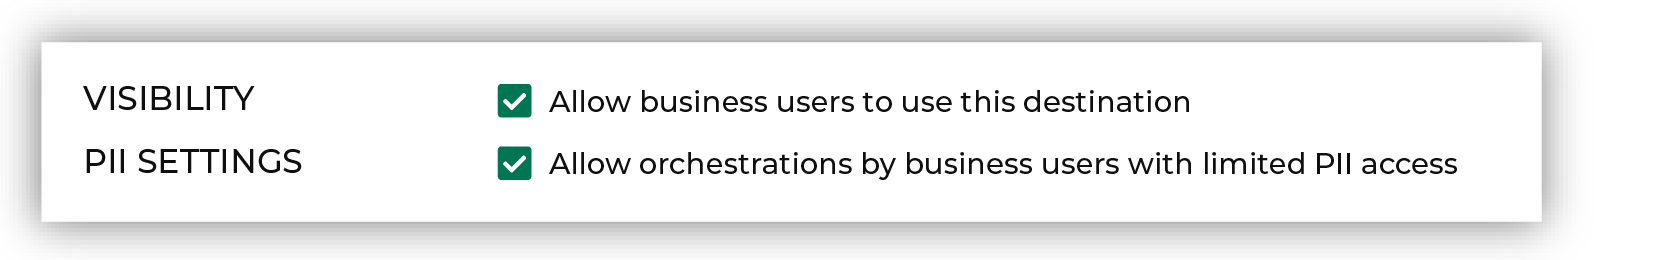 Allow business users access to this destination.